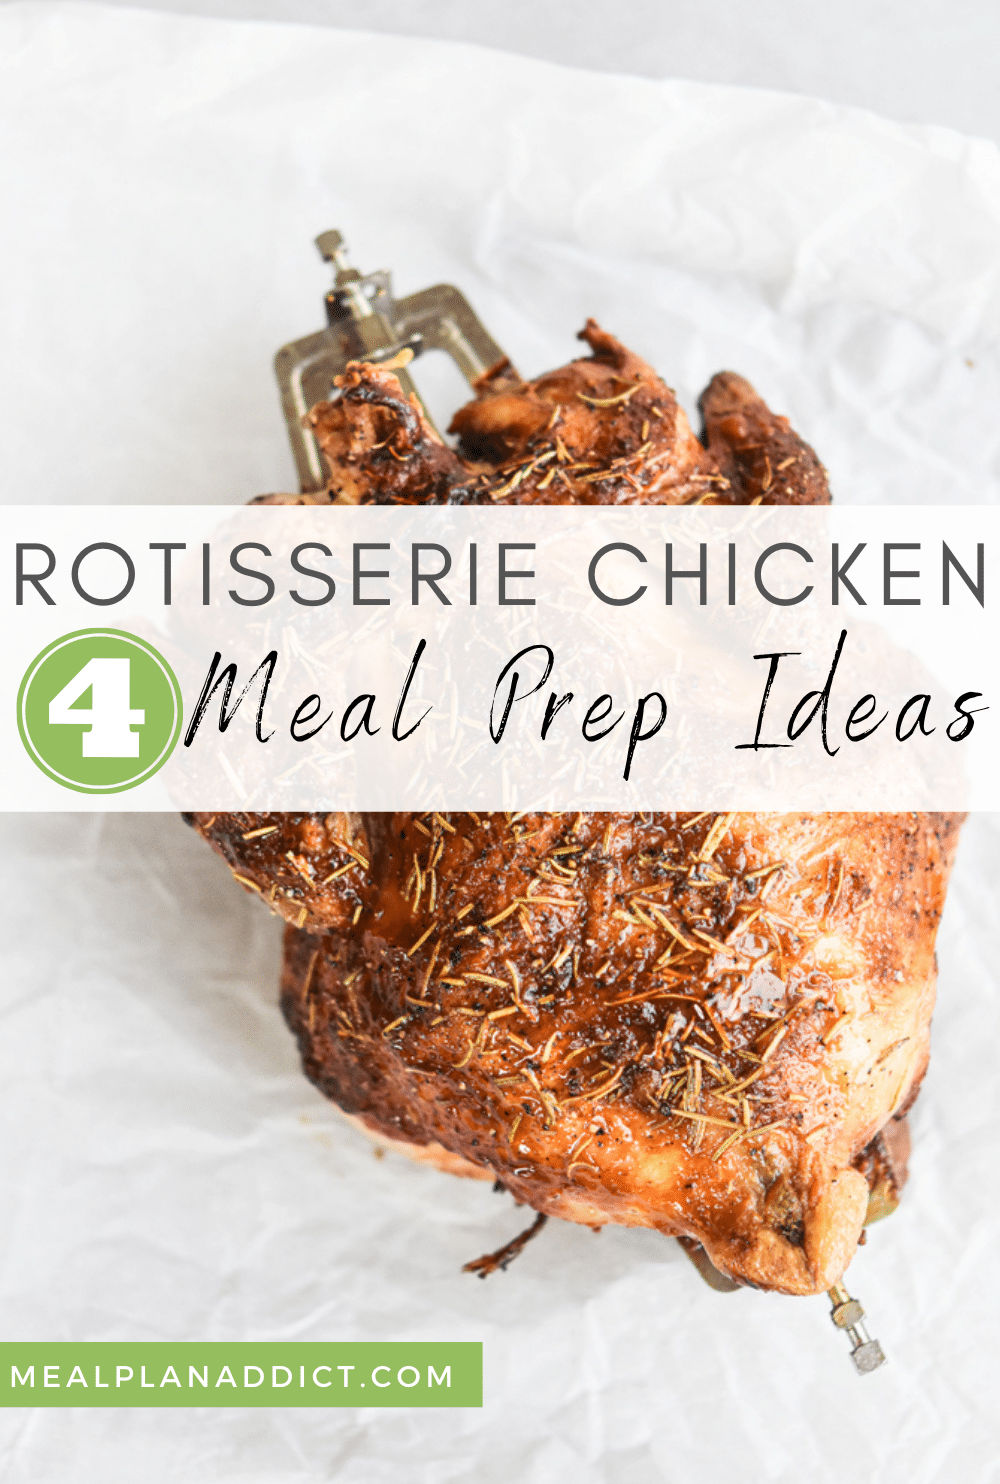 Rotisserie Chicken with 4 Meal Prep Lunch Ideas